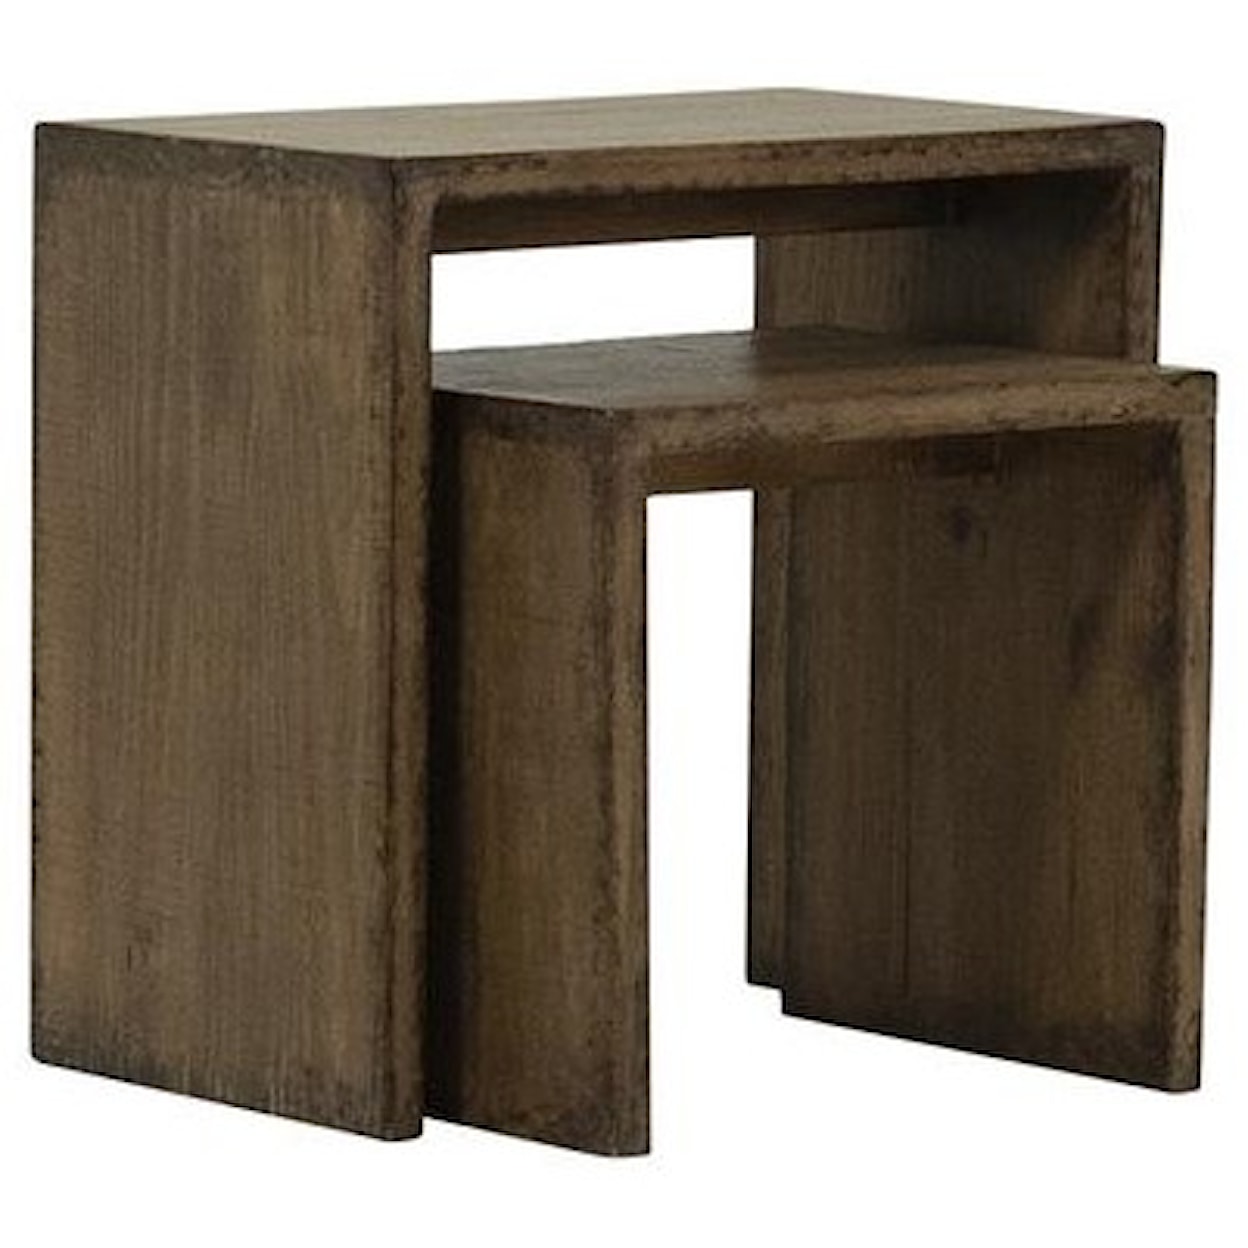 Dovetail Furniture End Tables and Night Stands Merwin Sidetables